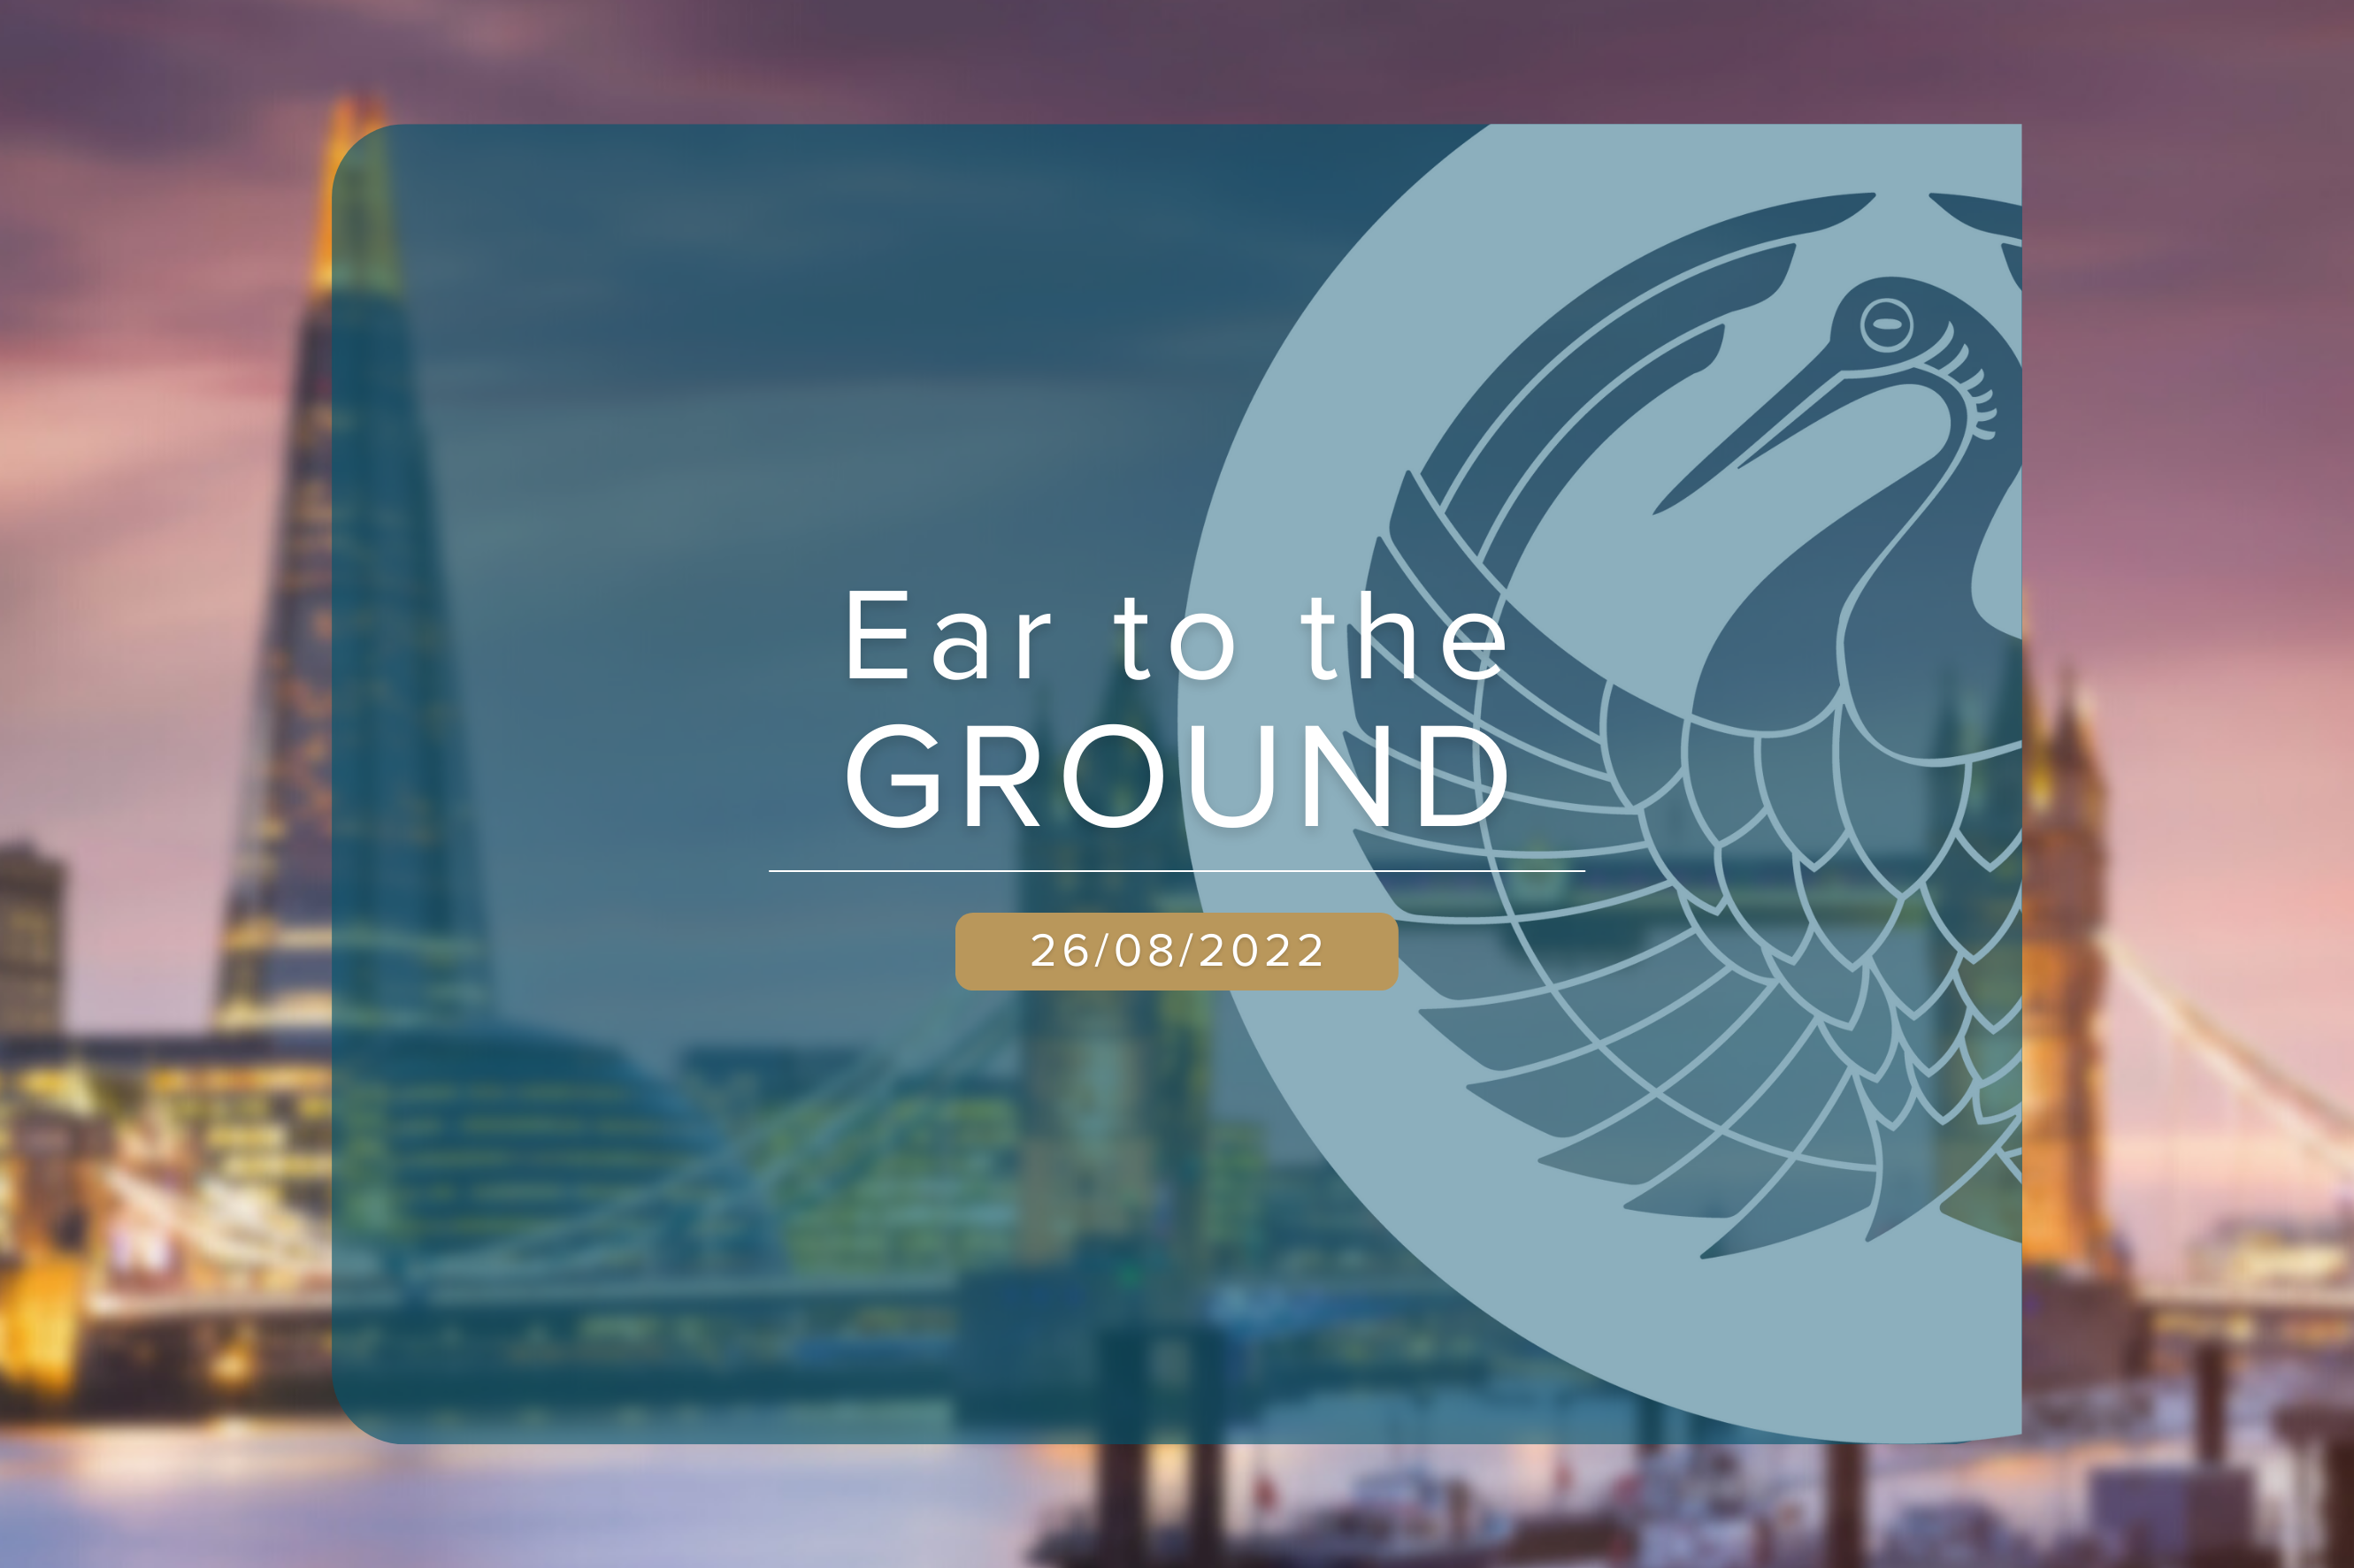 Ear to the ground 26/08/22